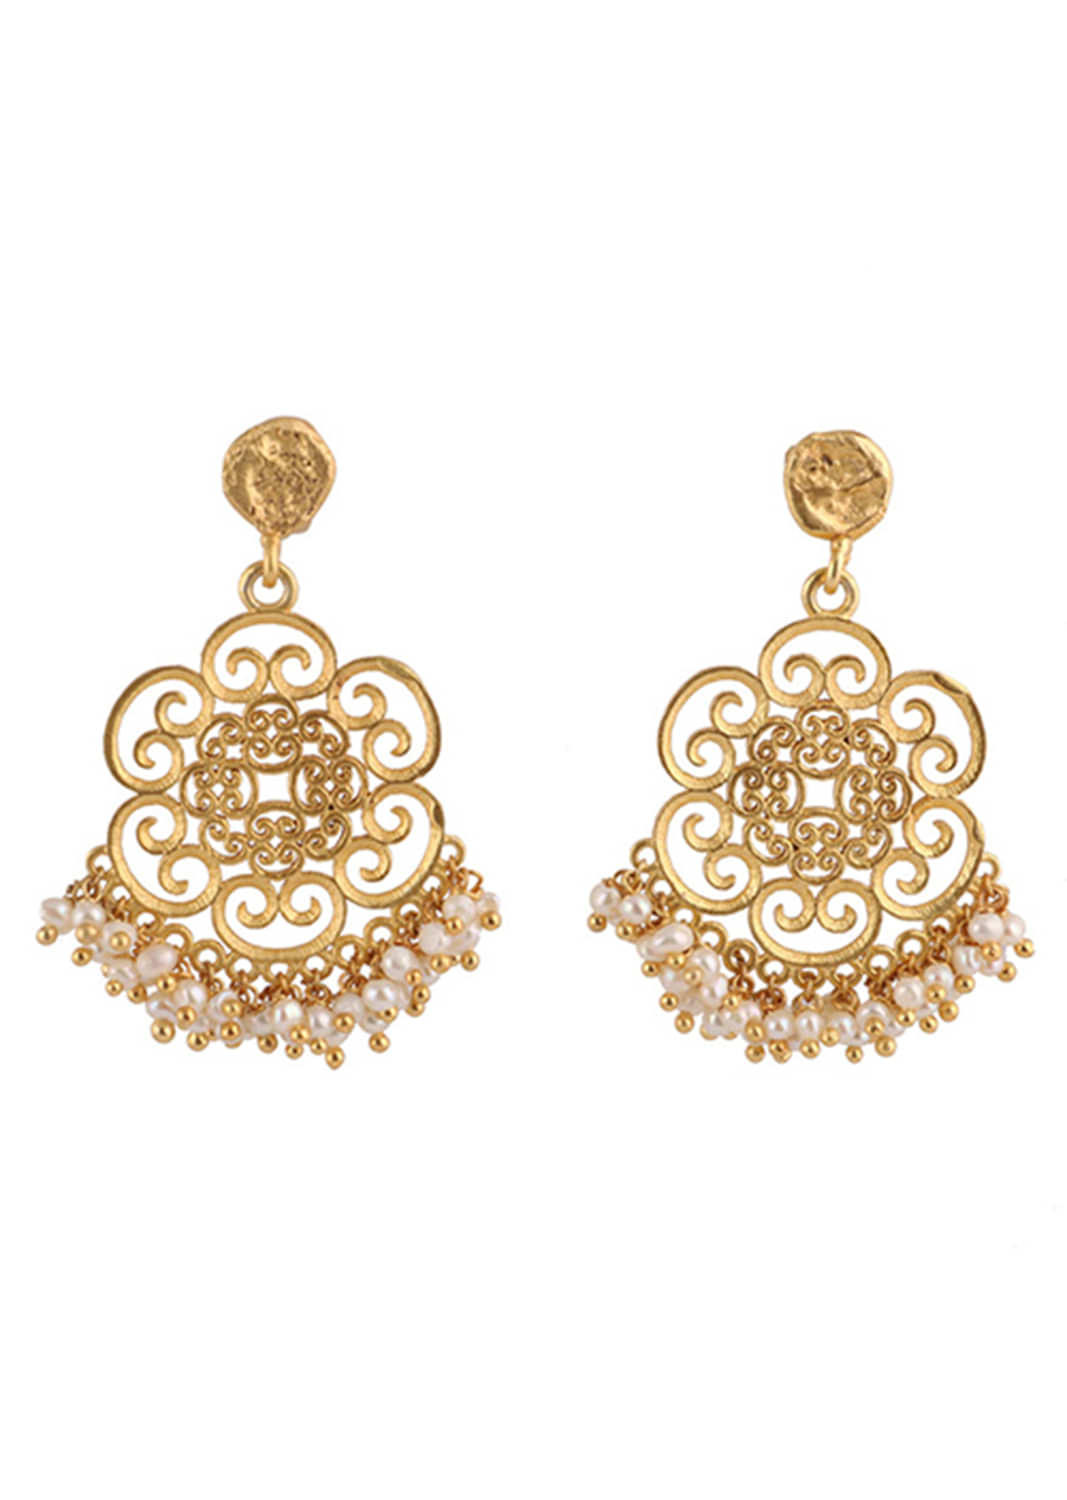 Gold Plated Floral Earrings With Beautiful Filigree Motifs And Pearl Beads By Zariin